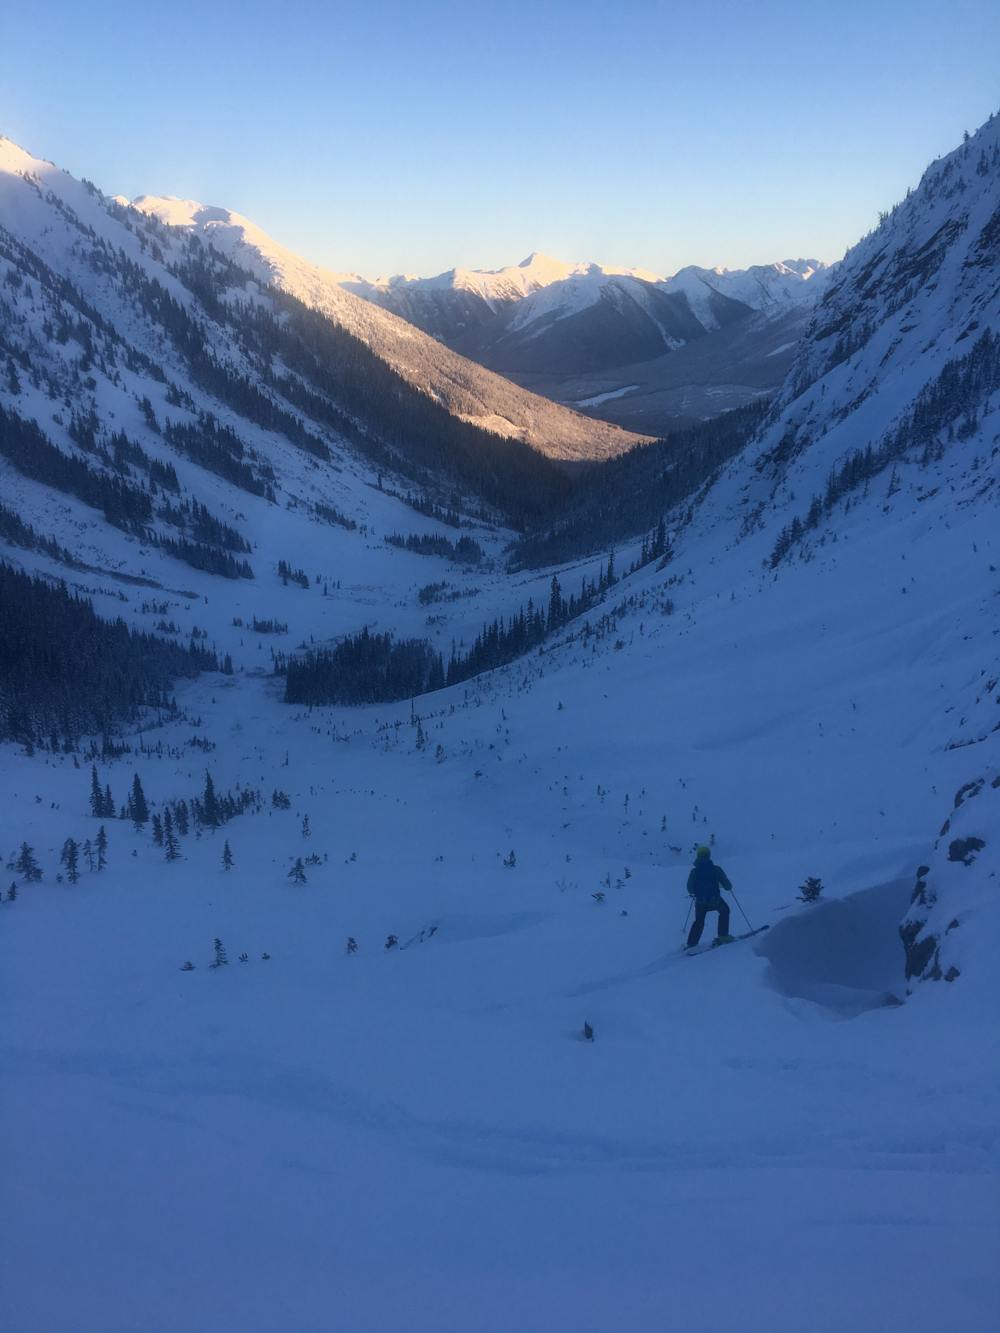 Skiing out of the drainage towards Cayoosh Creek